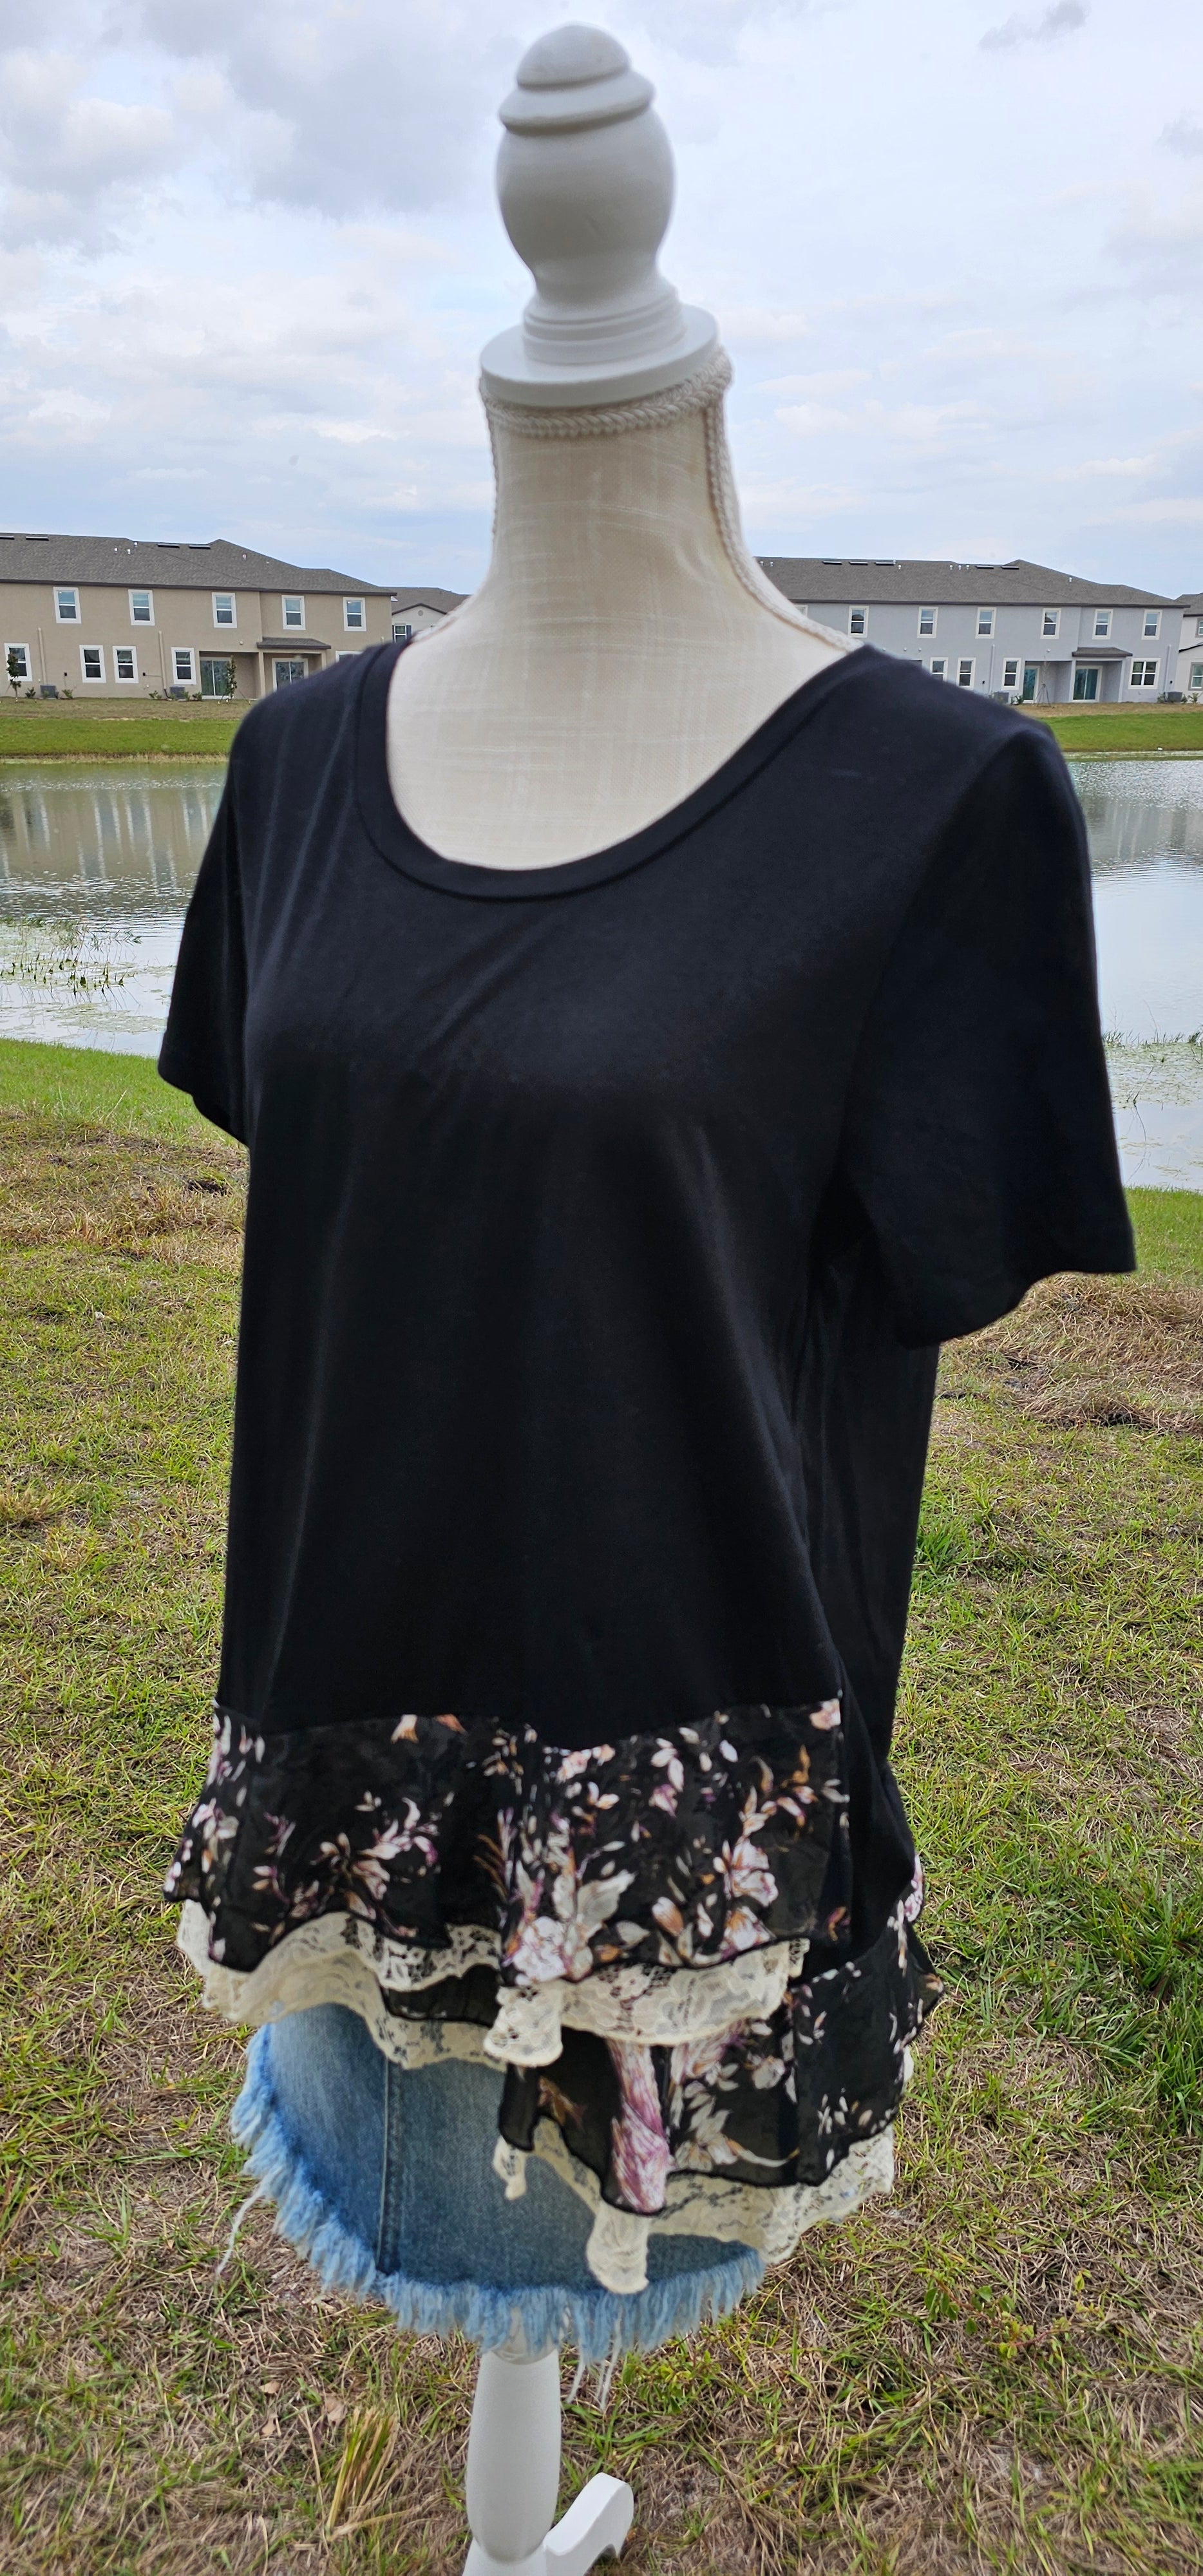 This is a comfy and casual black top, which features short sleeves, rounded neckline, layering lace and layering flowery print bottom. This is a great staple piece to your wardrobe. Sizes small through large.